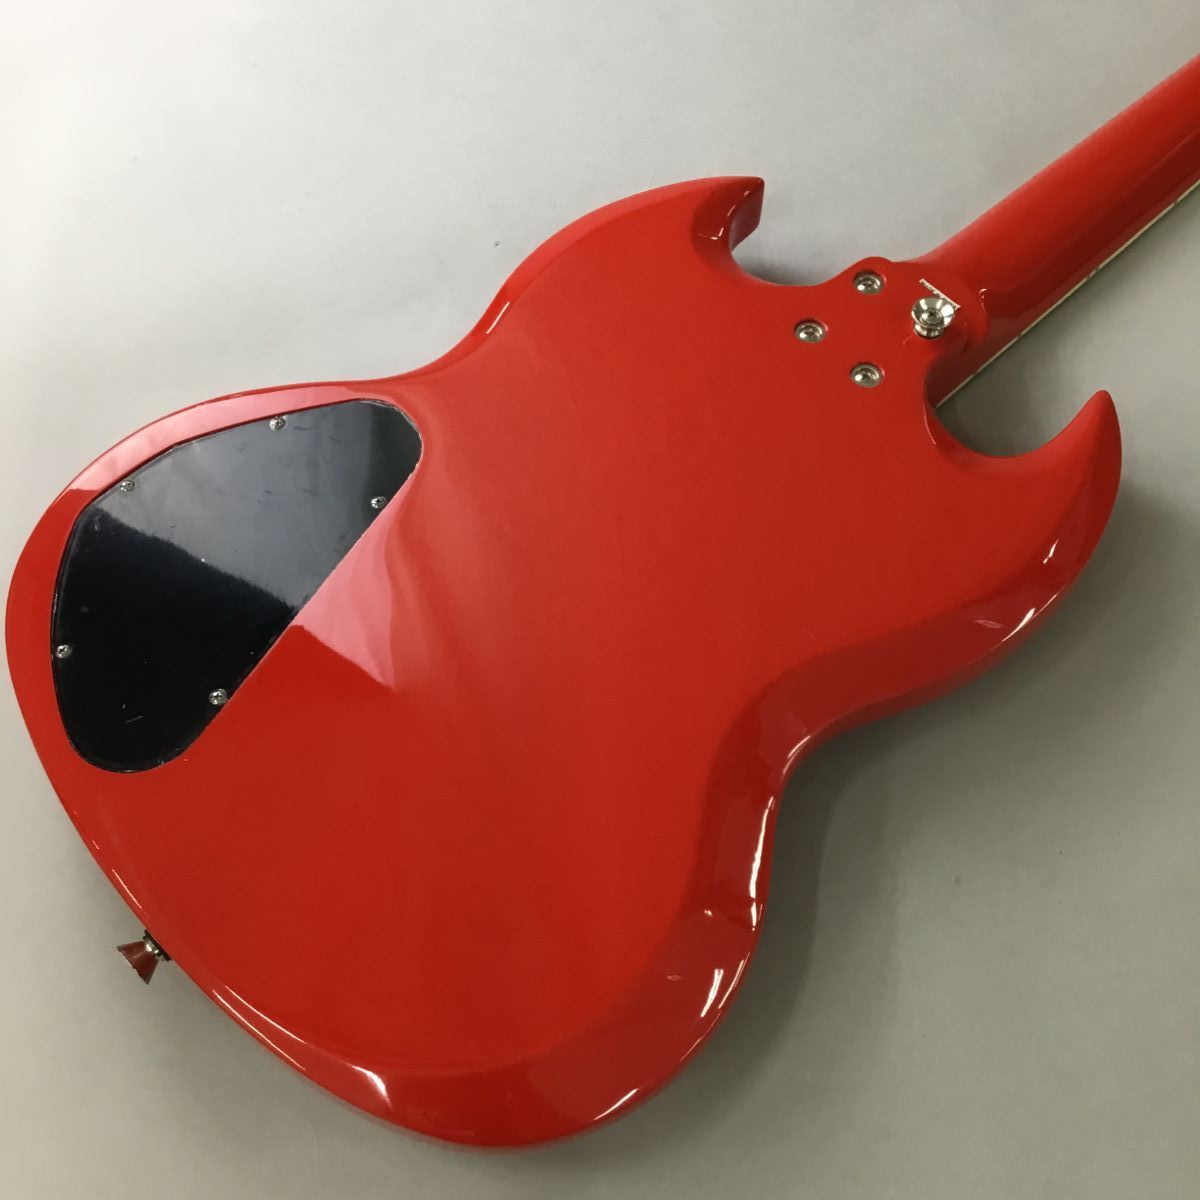 Epiphone Power Players SG Lava Red エレキギター ラヴァレッド 7/8